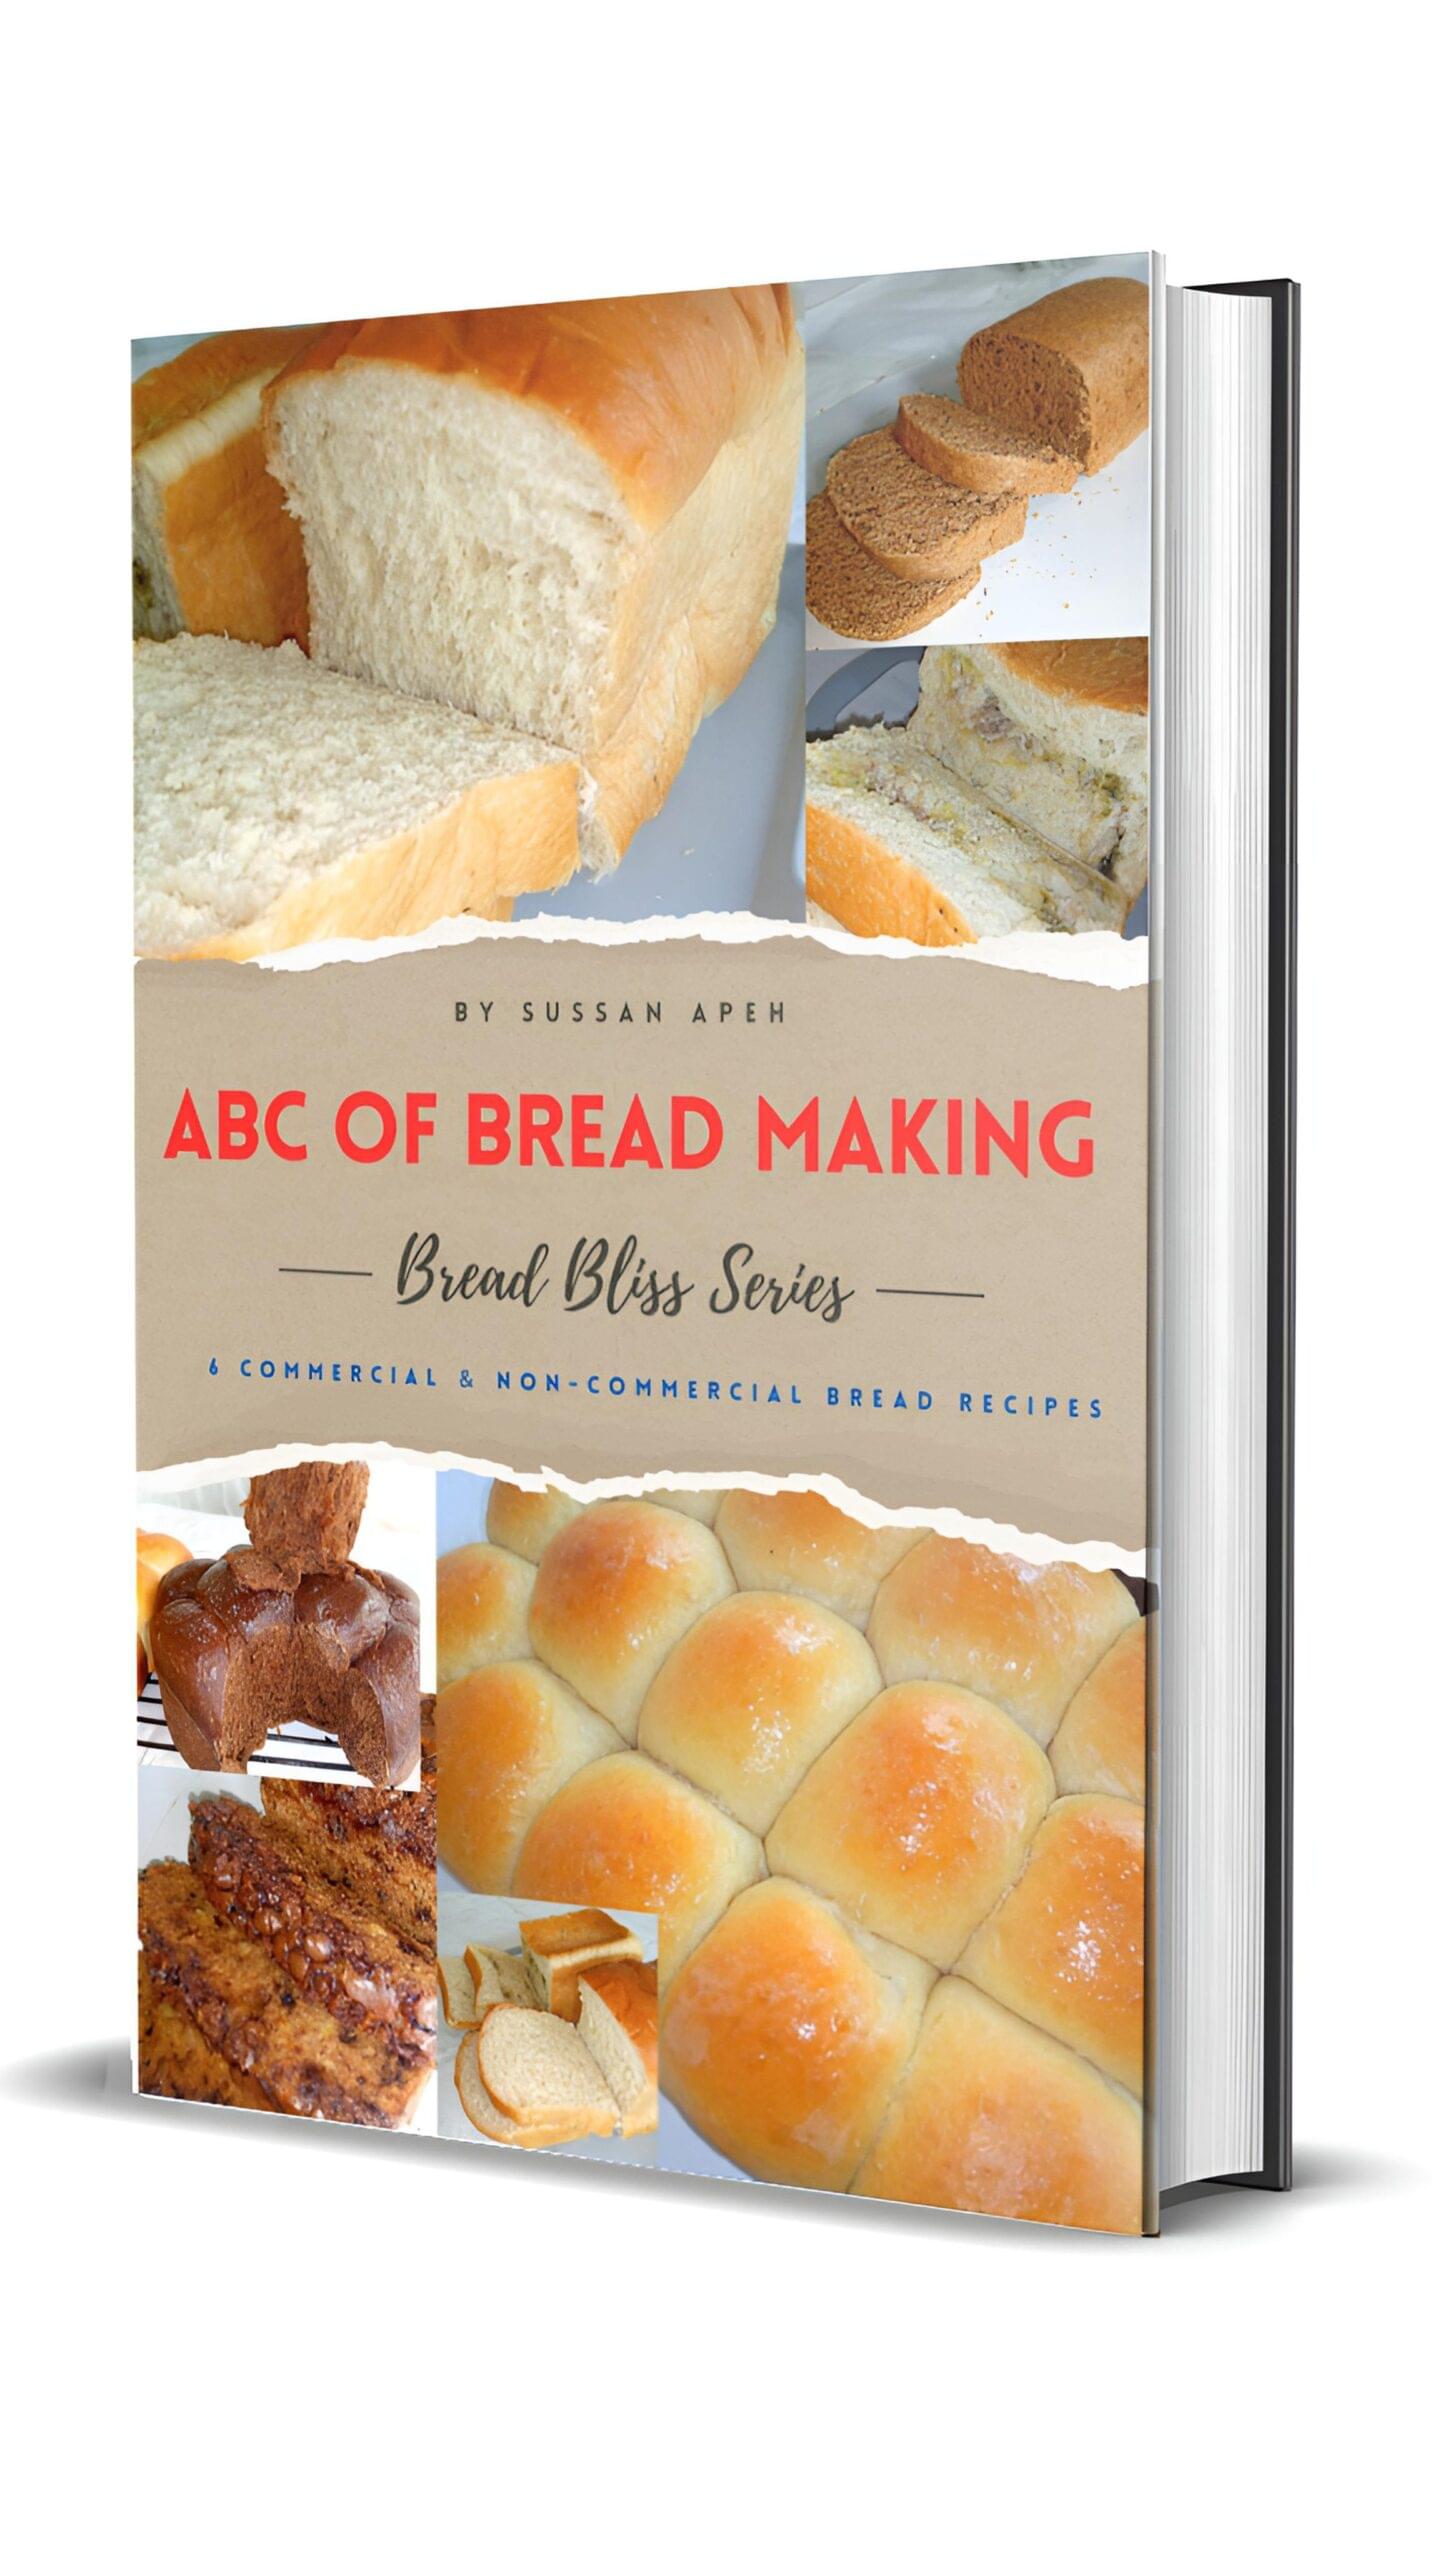 ABC OF BREAD MAKING